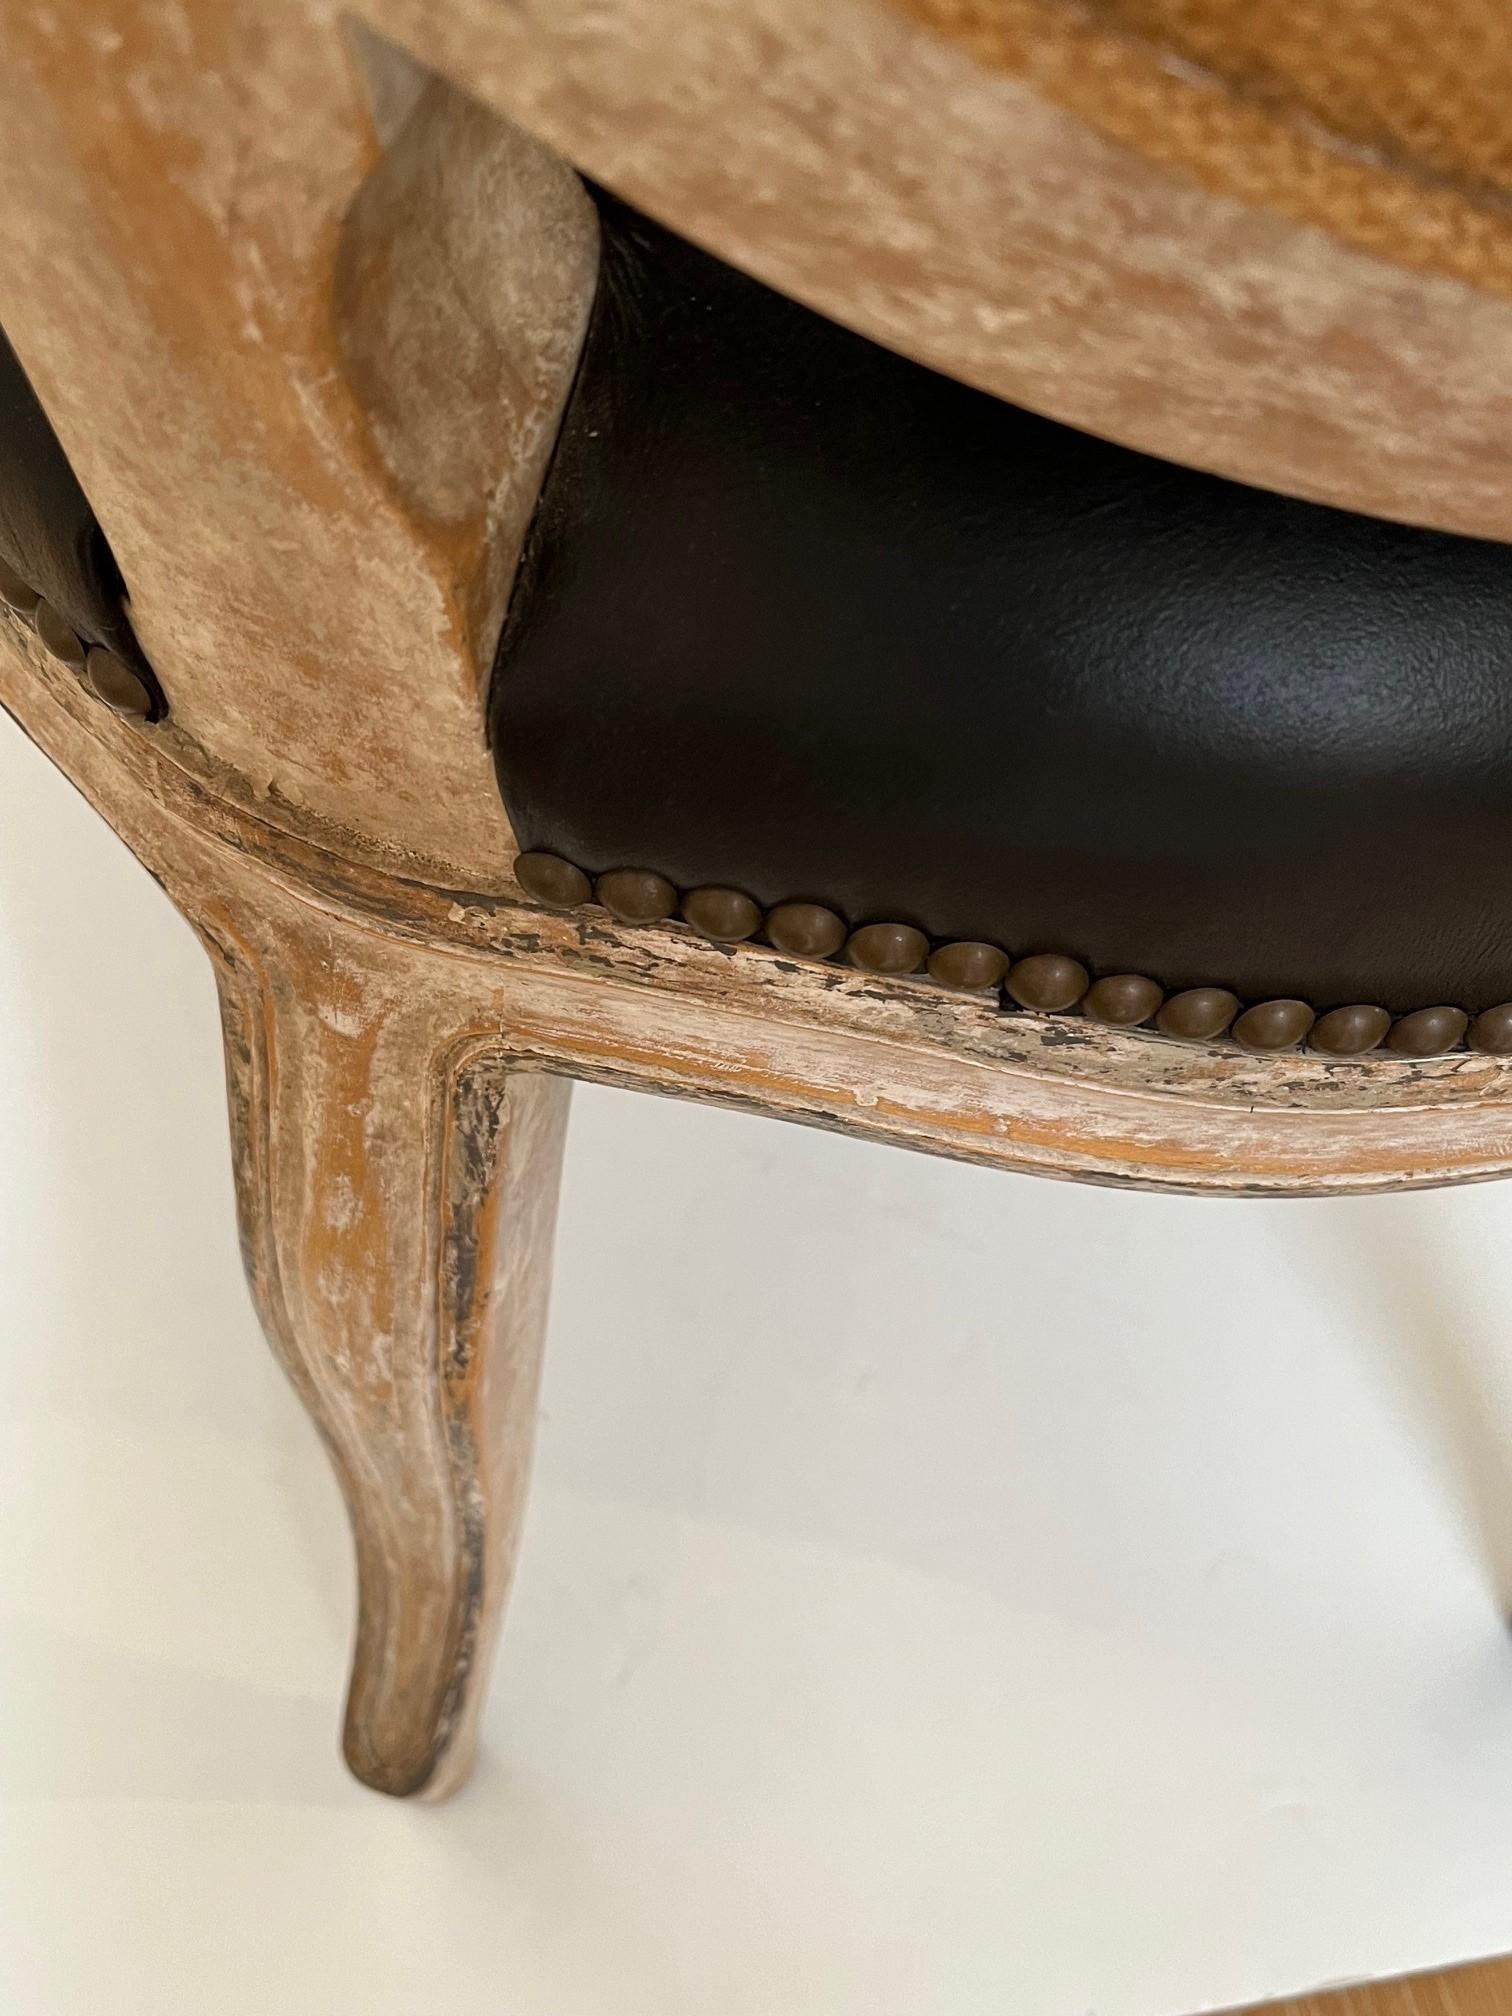 Made to Order Louis XV Style Dining Side Chair, Upholstered in Black Leather with Antique Brass Nail Head Trim at Seat and Inside Oval Back, Solid Wood Frame, This a Showroom Model
Upholstery: Customer Own Material